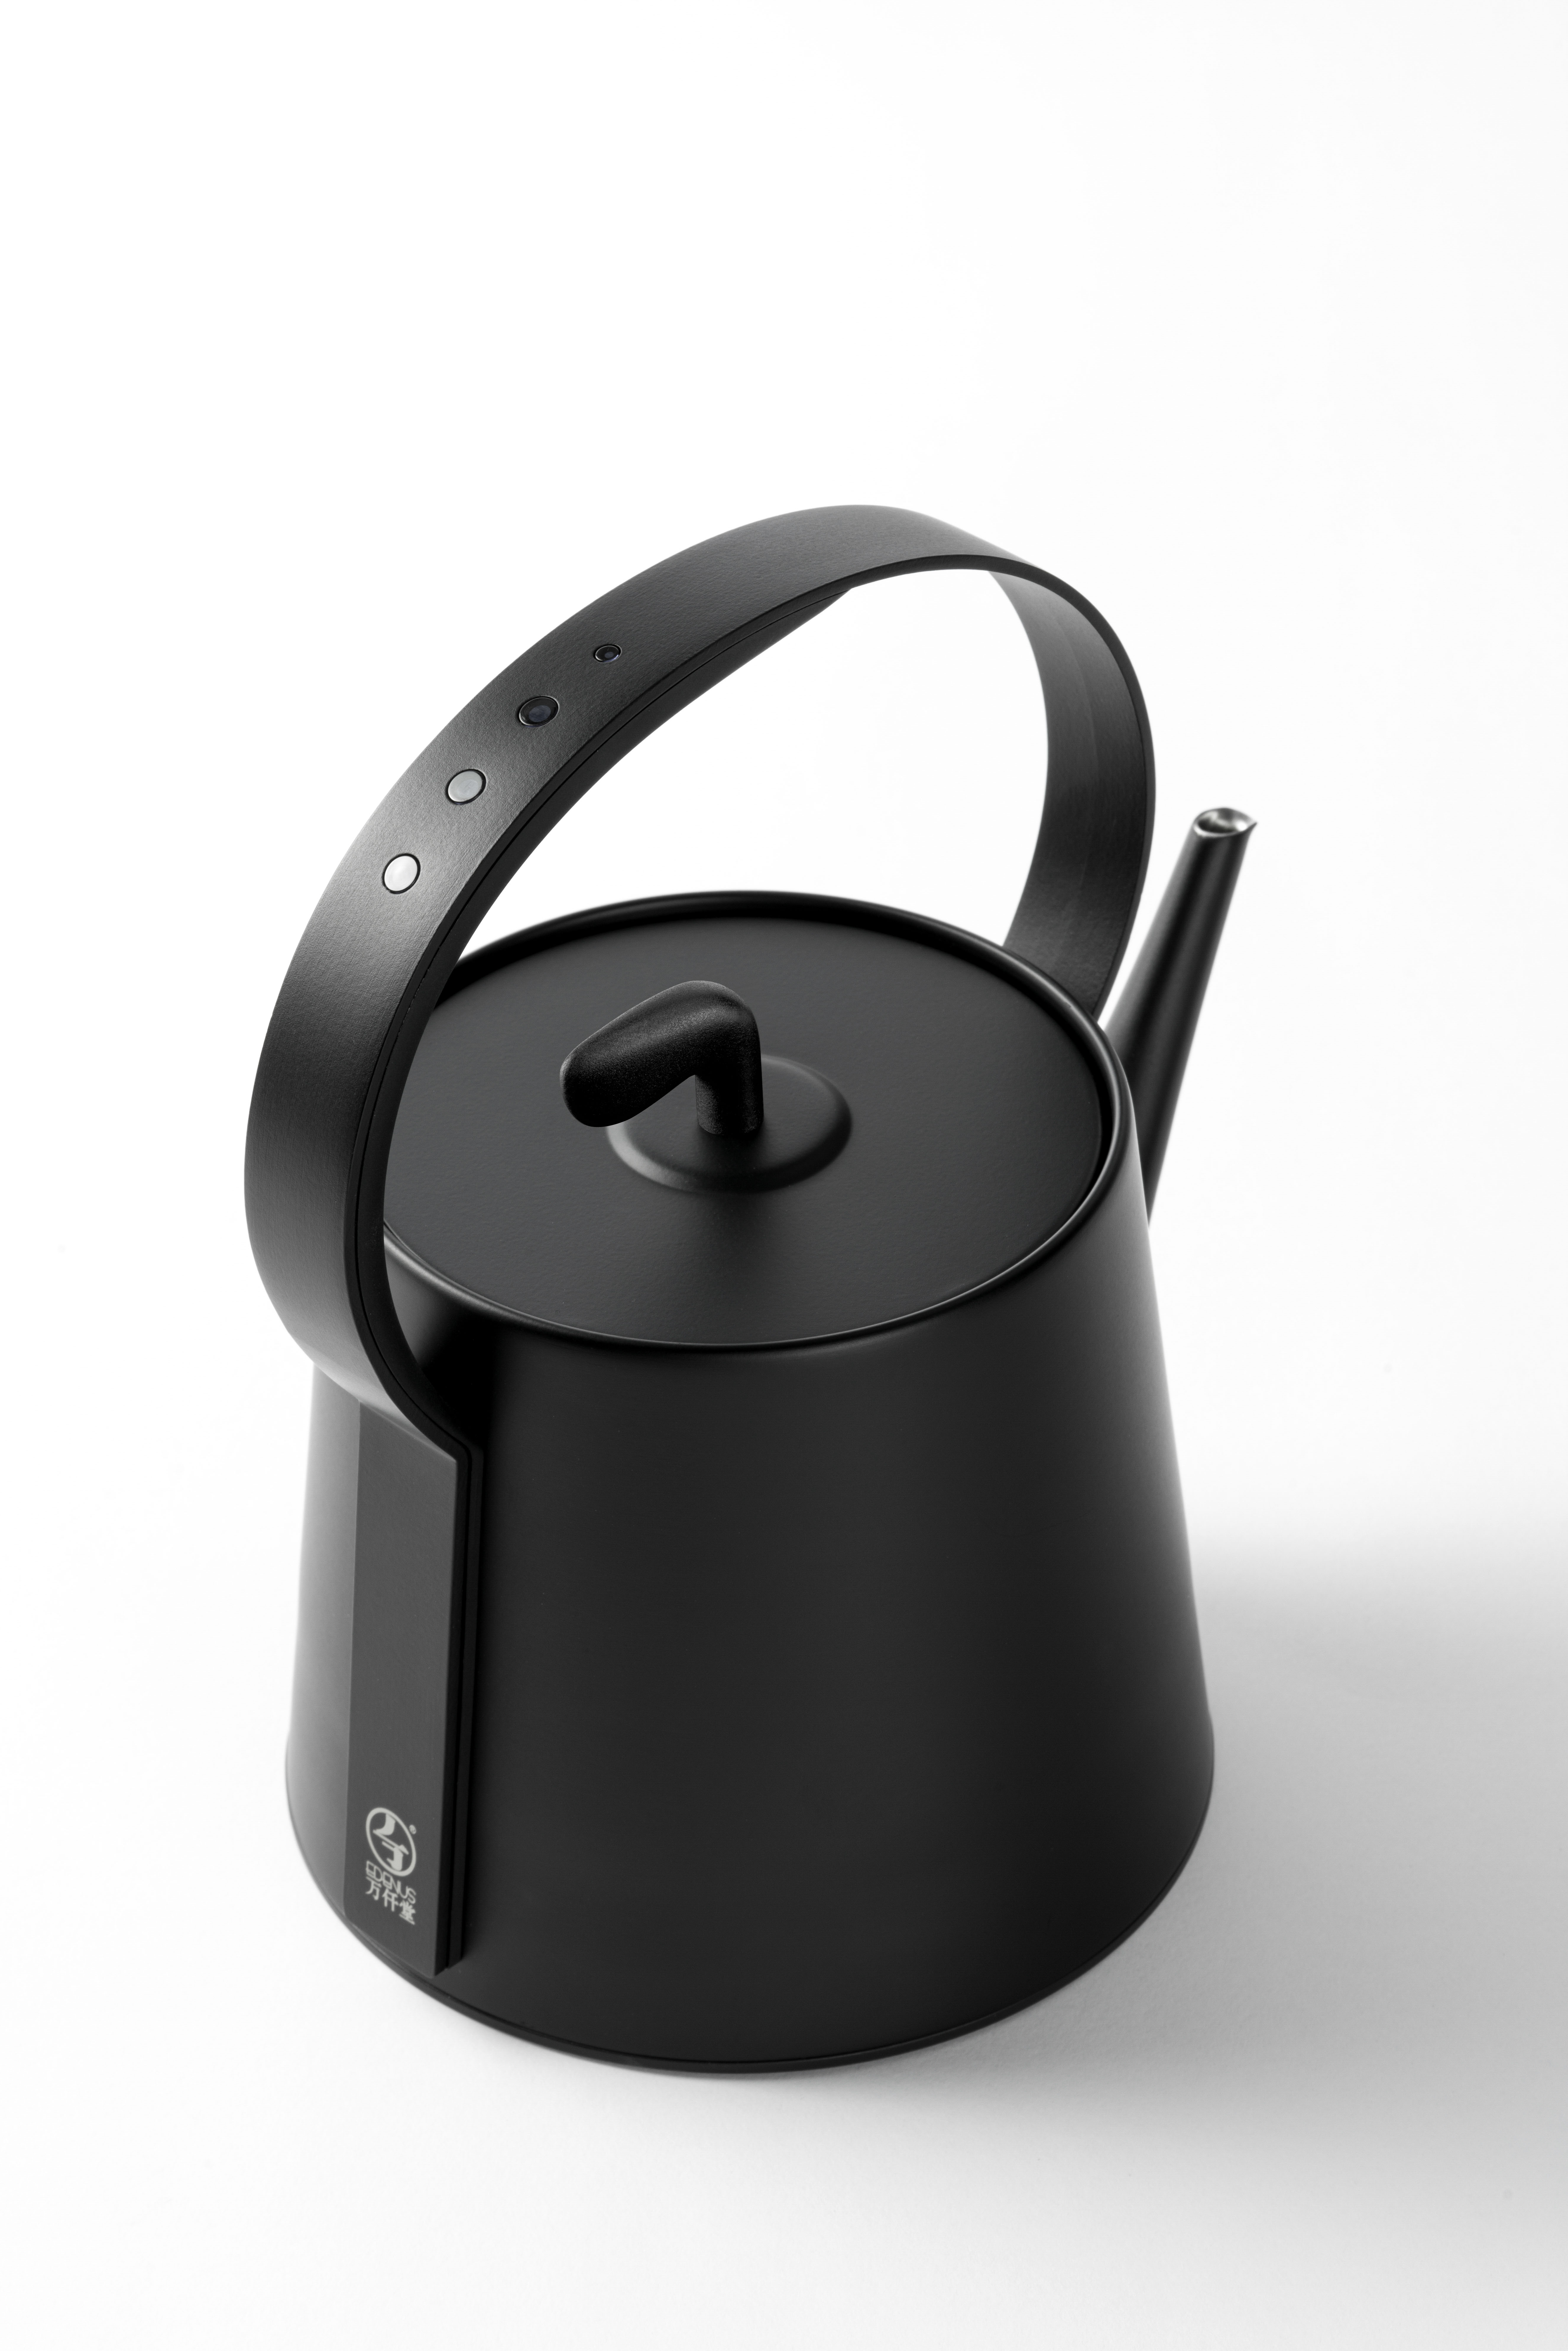 This Japanese kettle's detailed design will leave you wondering “real or  render?” - Yanko Design